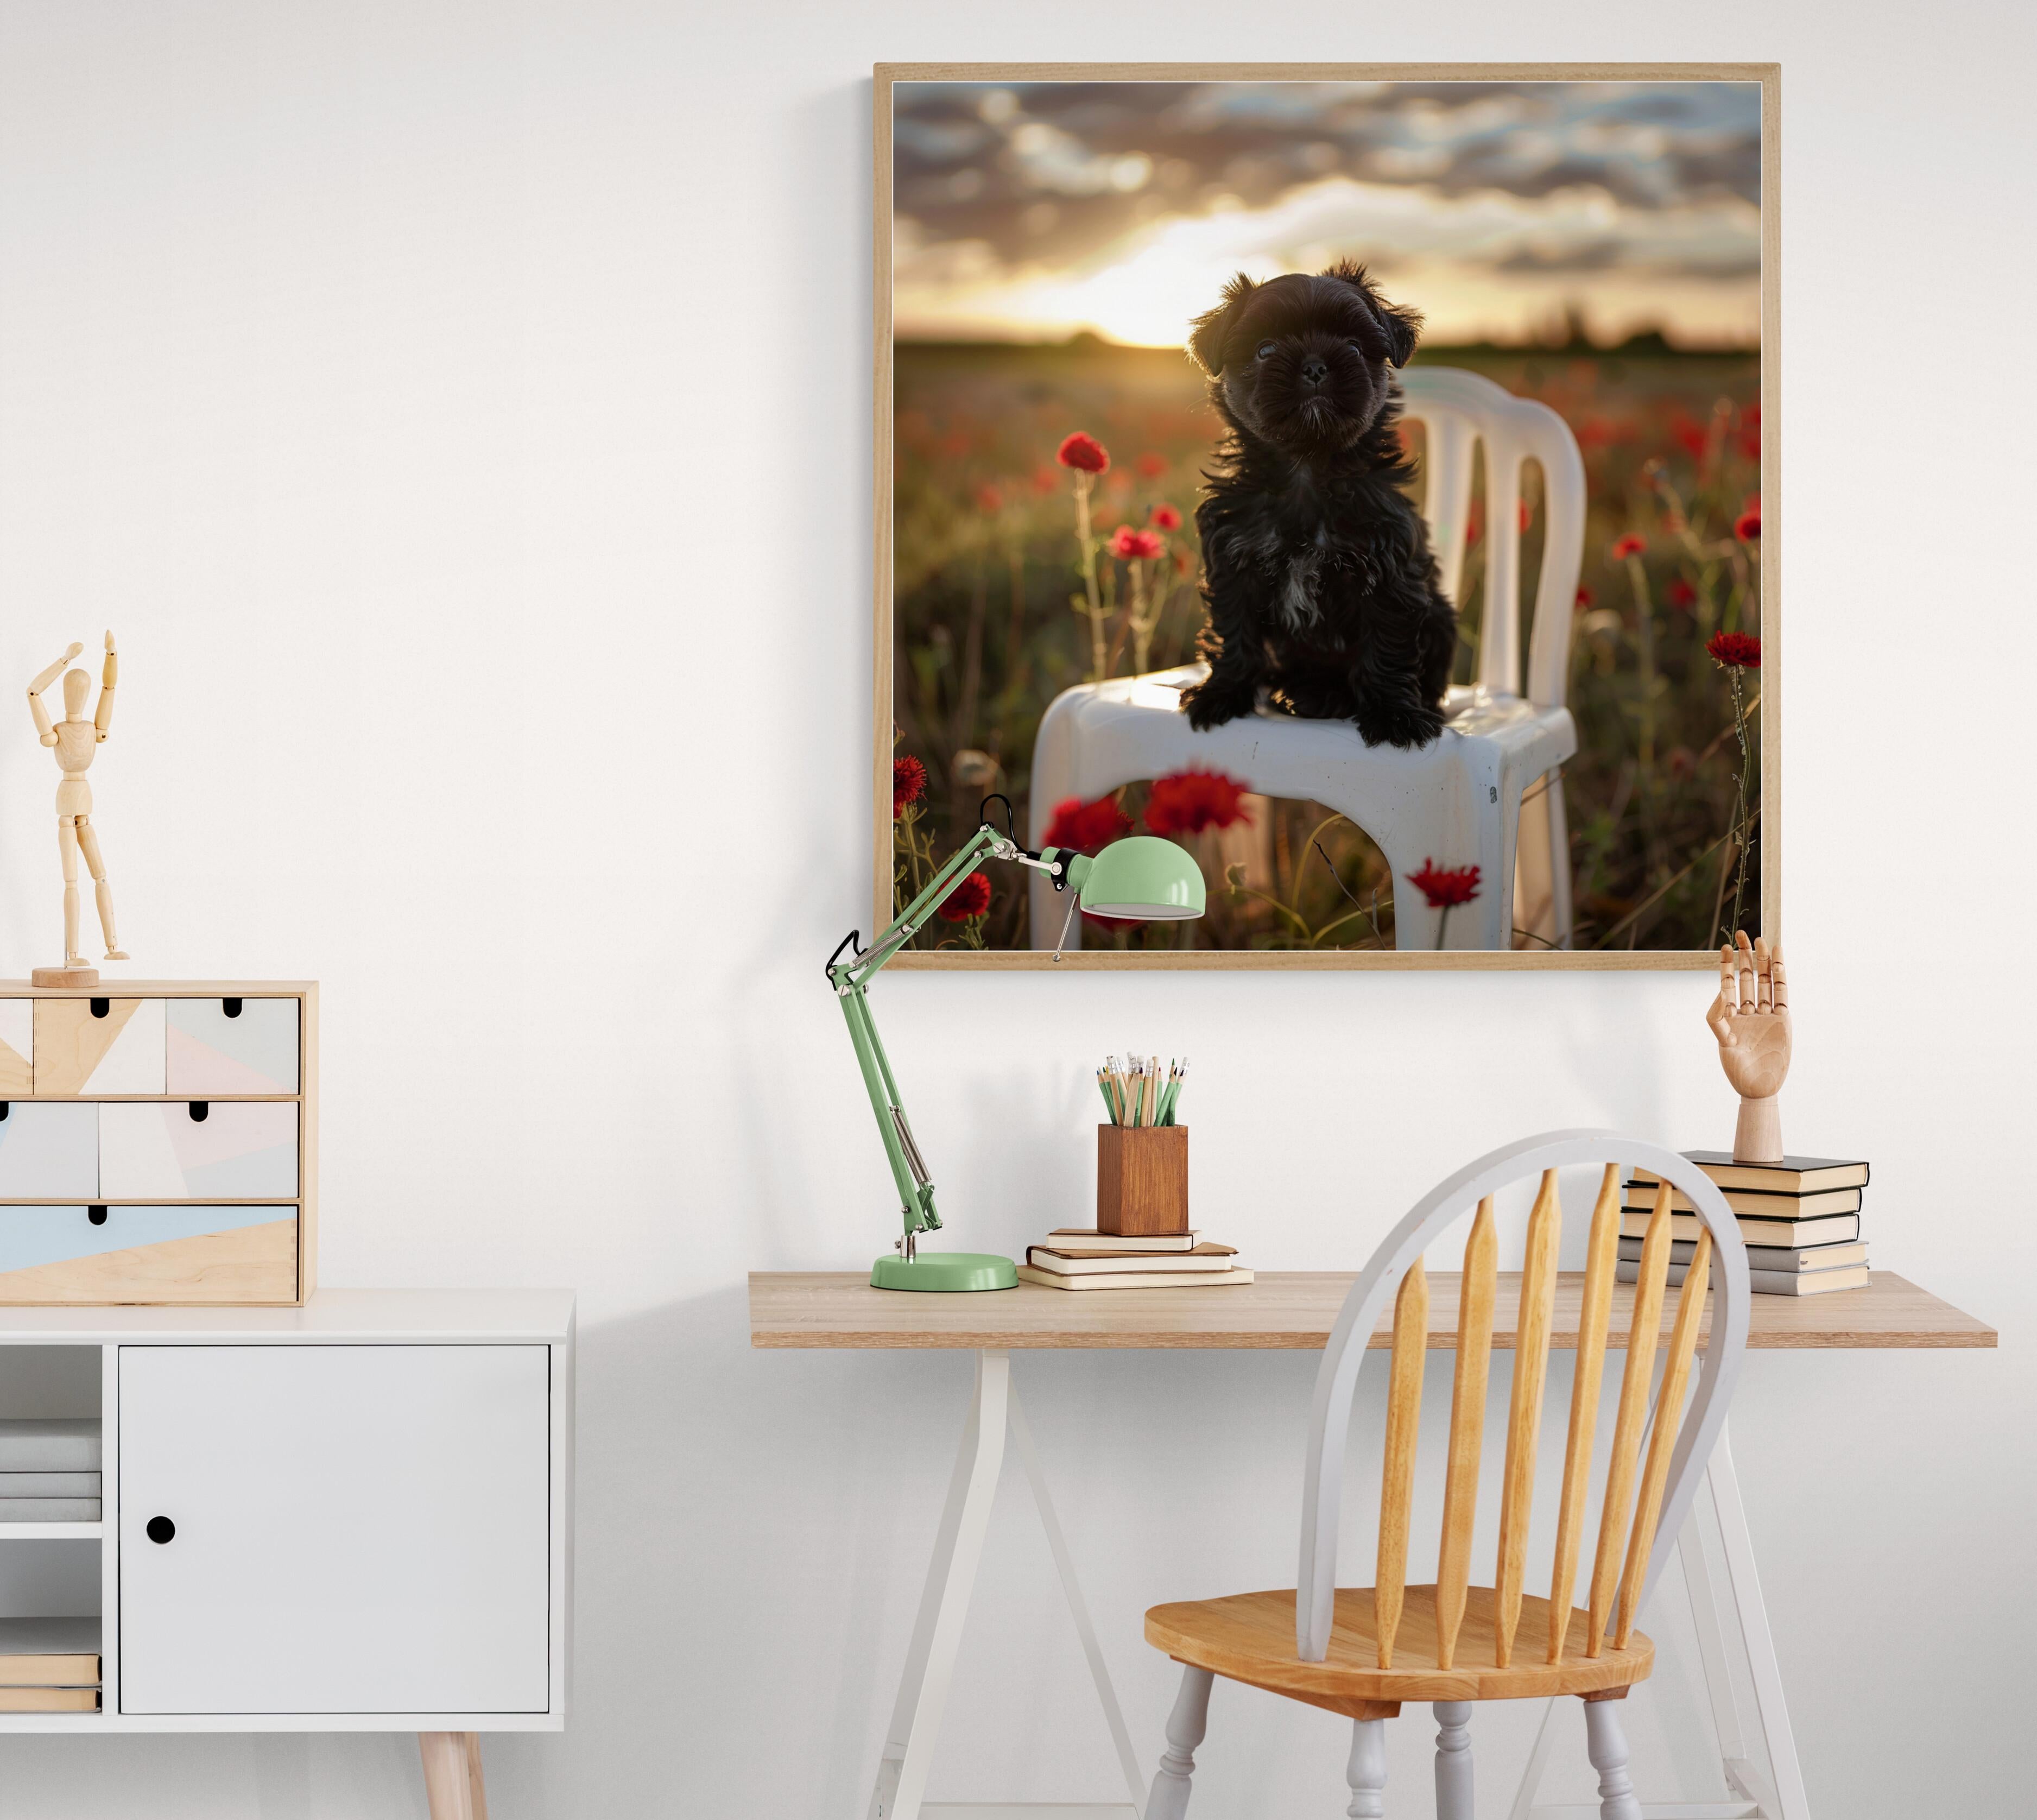 Lord Fauntleroy
Chewbacca - Affenpinscher (Puppy, Dog, Portrait, Staged, Iconic, Funny, Whimsical, Heartwarming) 
2023
Archival Pigment Print on Hahnemuehle Baryta Rag 315gsm
Size: 24 x 24 inches (60.96 x 60.96cm)
Edition: 15
Signed, titled and